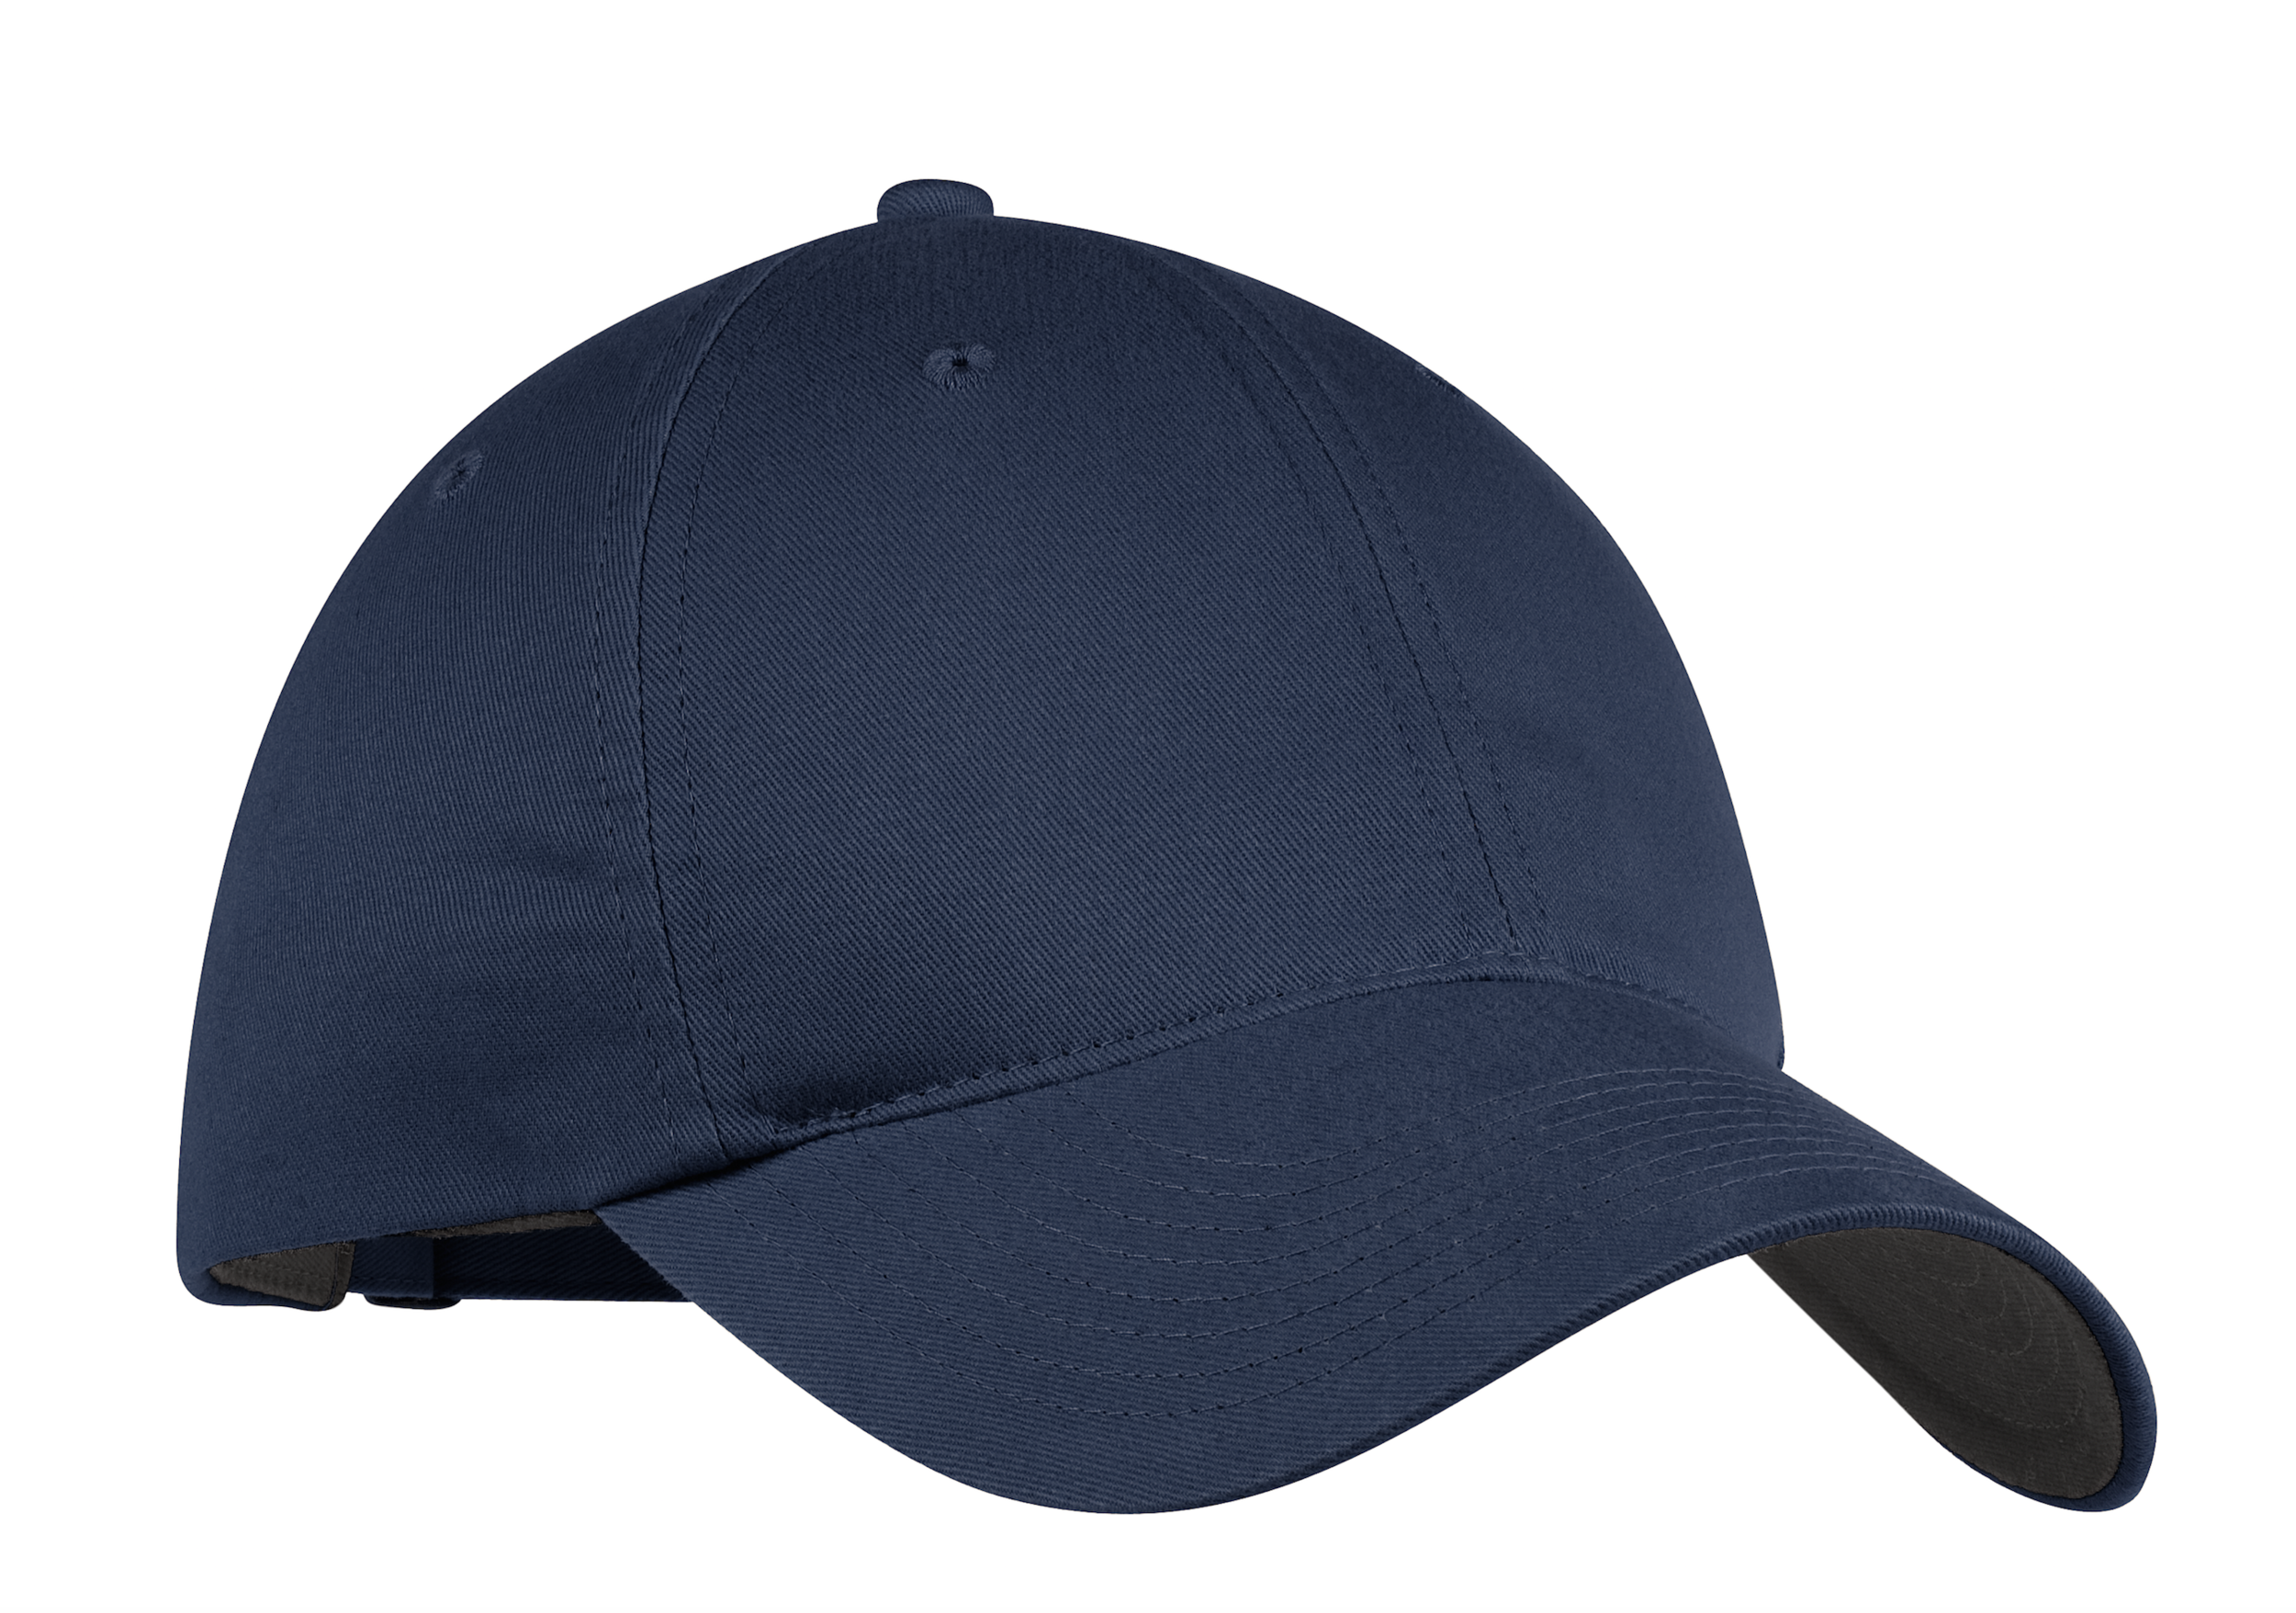 Nike Golf - Unstructured Twill Cap 